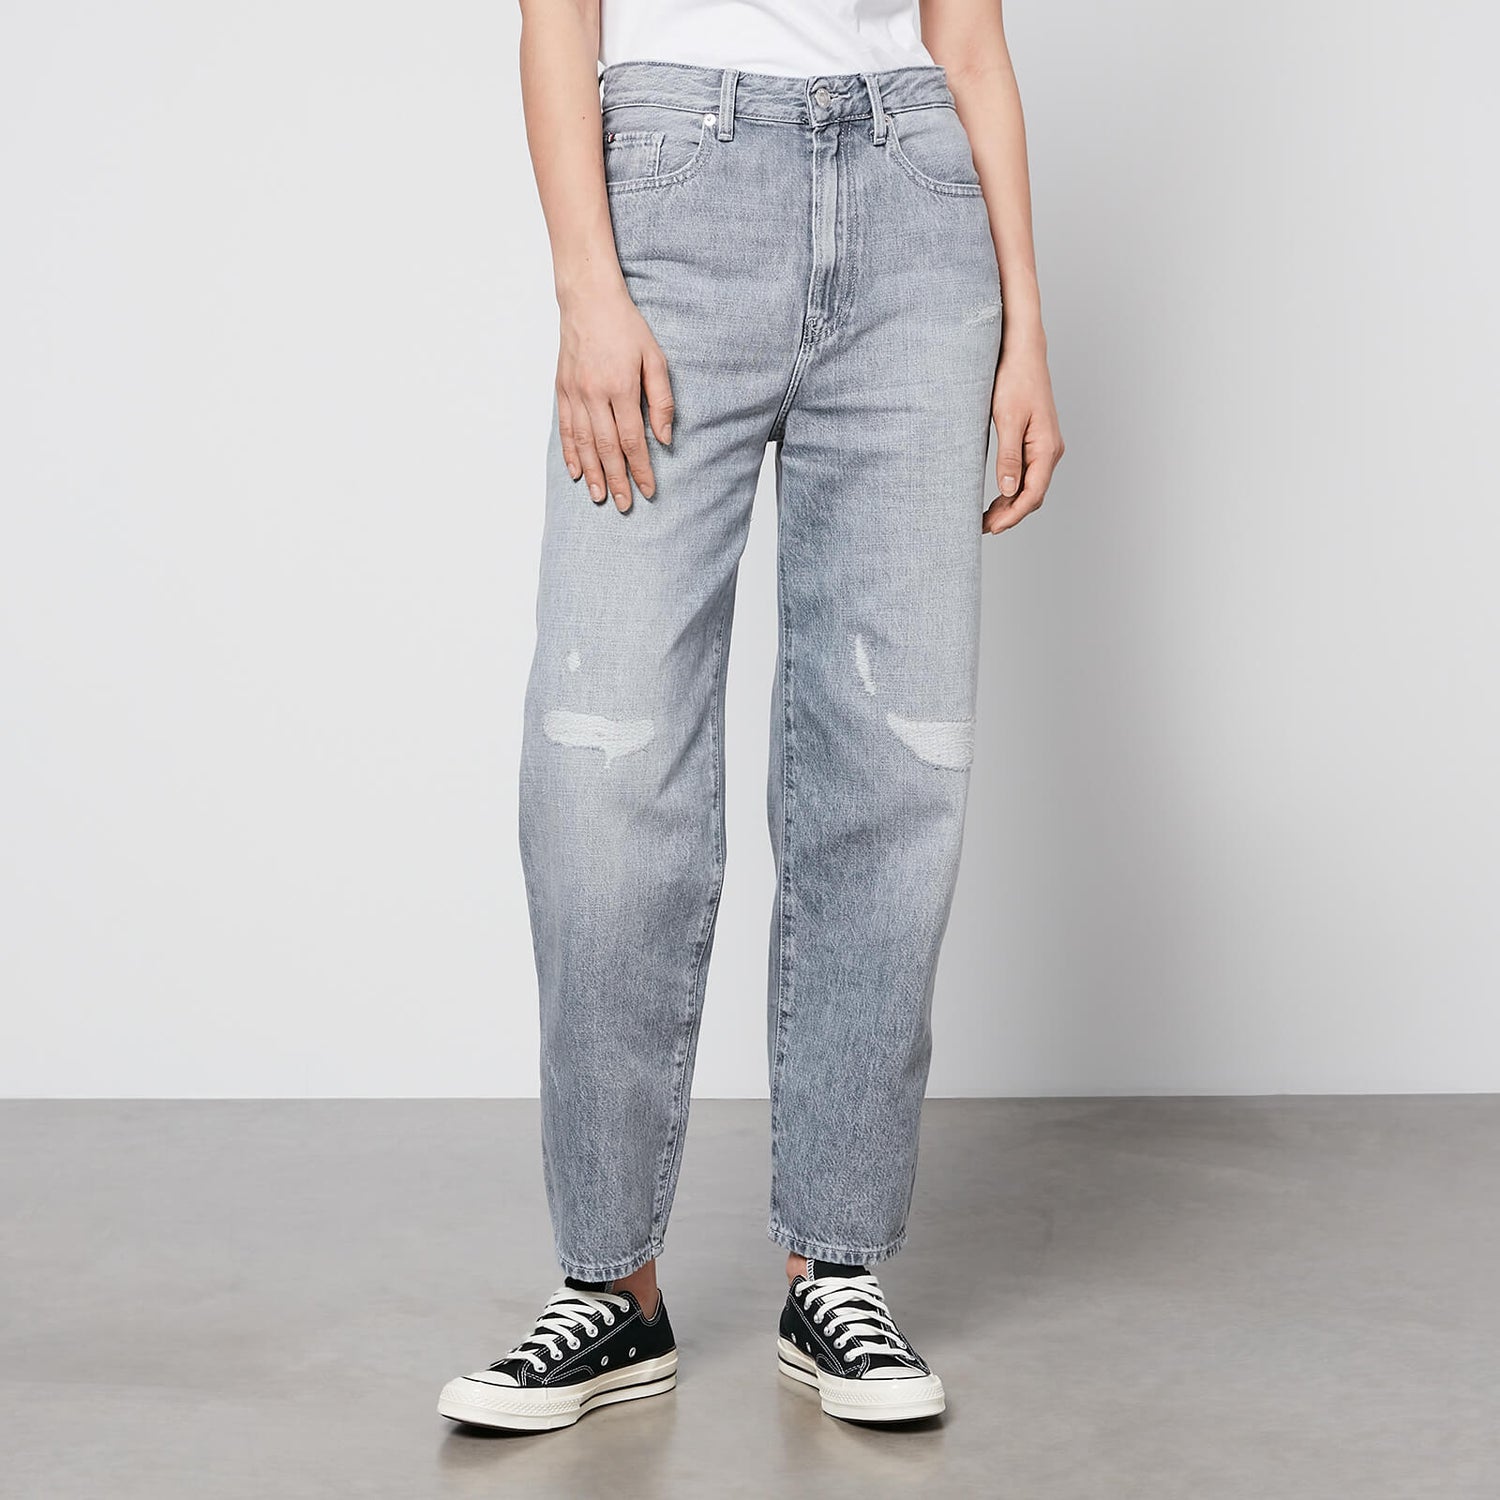 Tommy Hilfiger Balloon High-Waisted Ripped Denim Jeans - W29